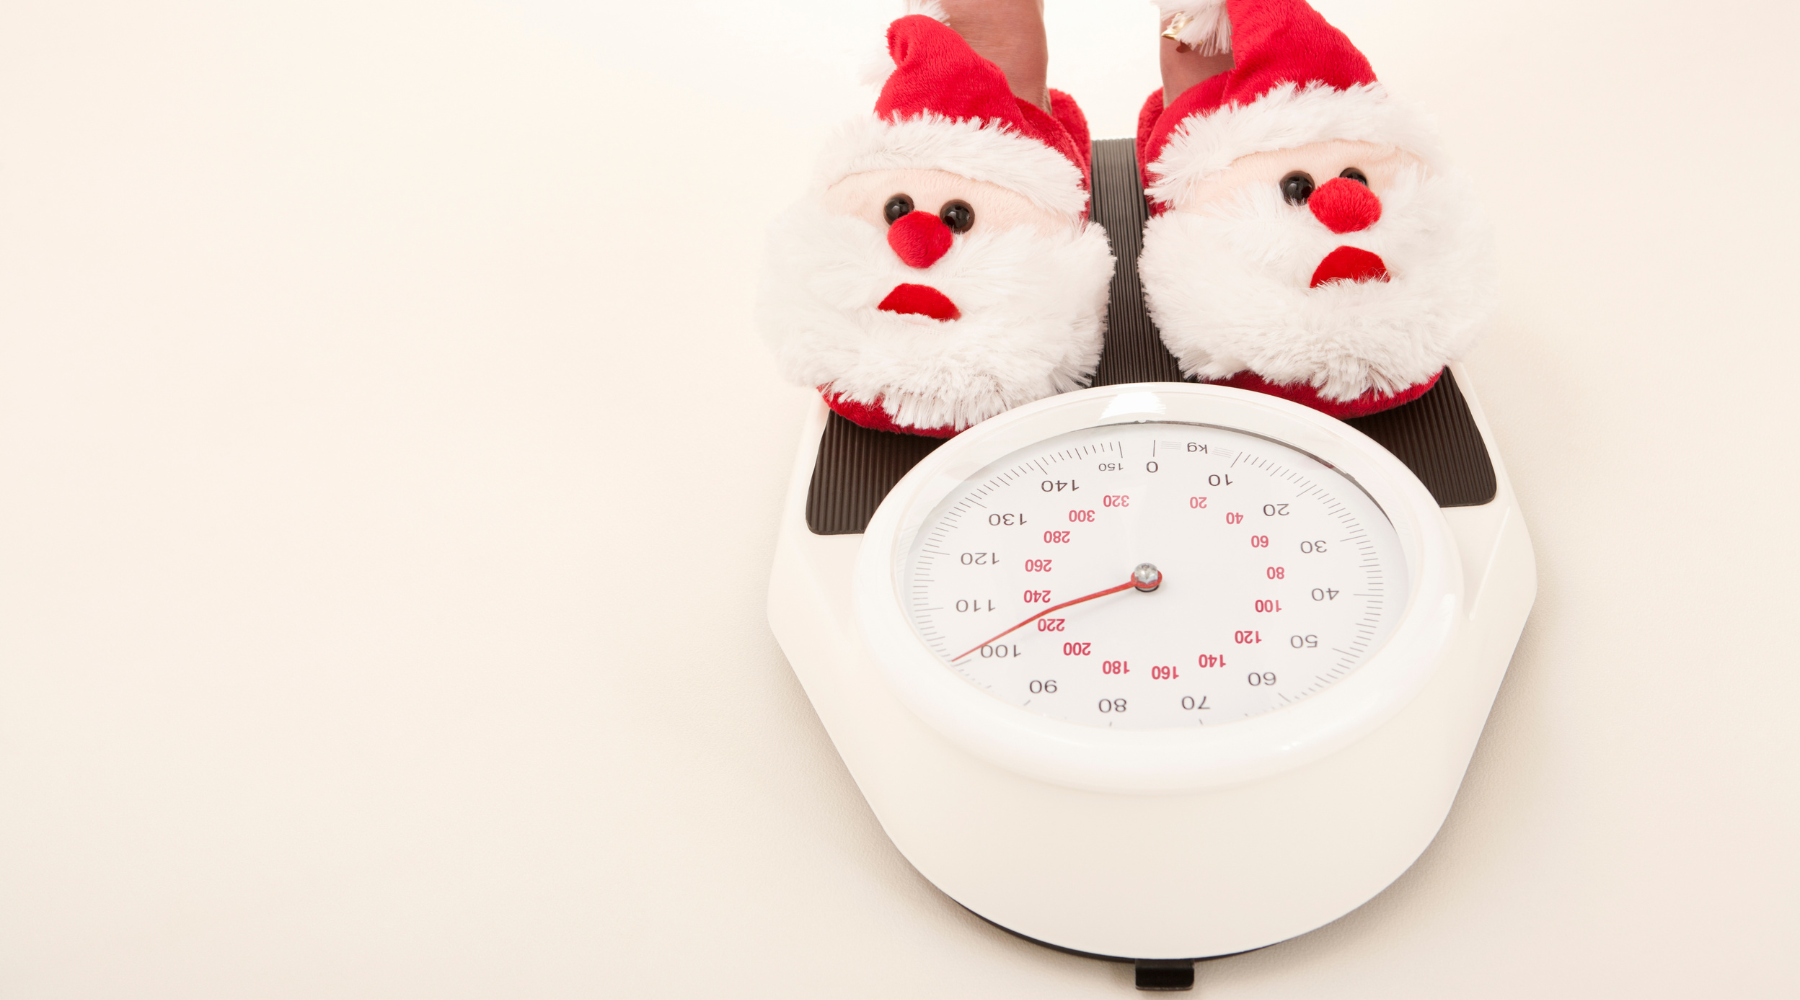 Standing on a scale showing weight gain with santa clause slippers. How to avoid weight gain in the winter months